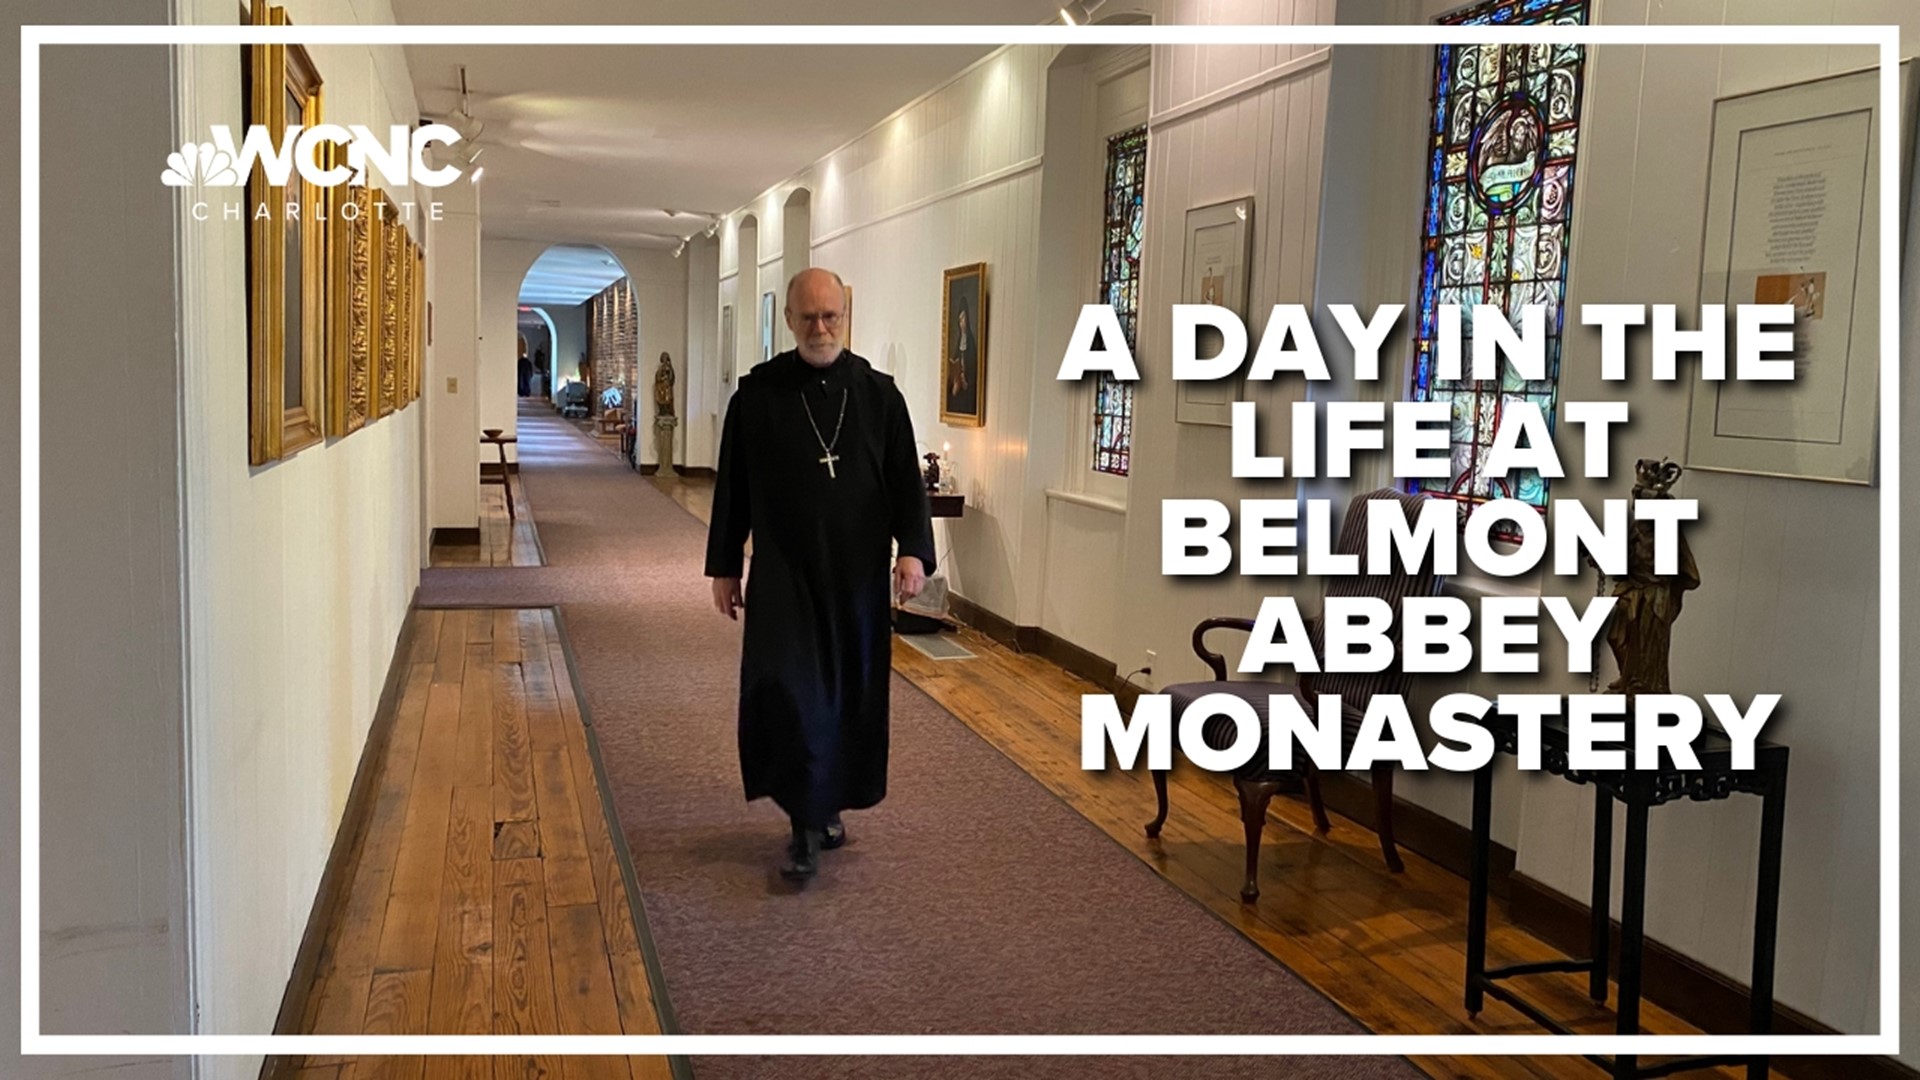 Monks offer an inside look at a day in the life at Belmont Abbey Monastery.